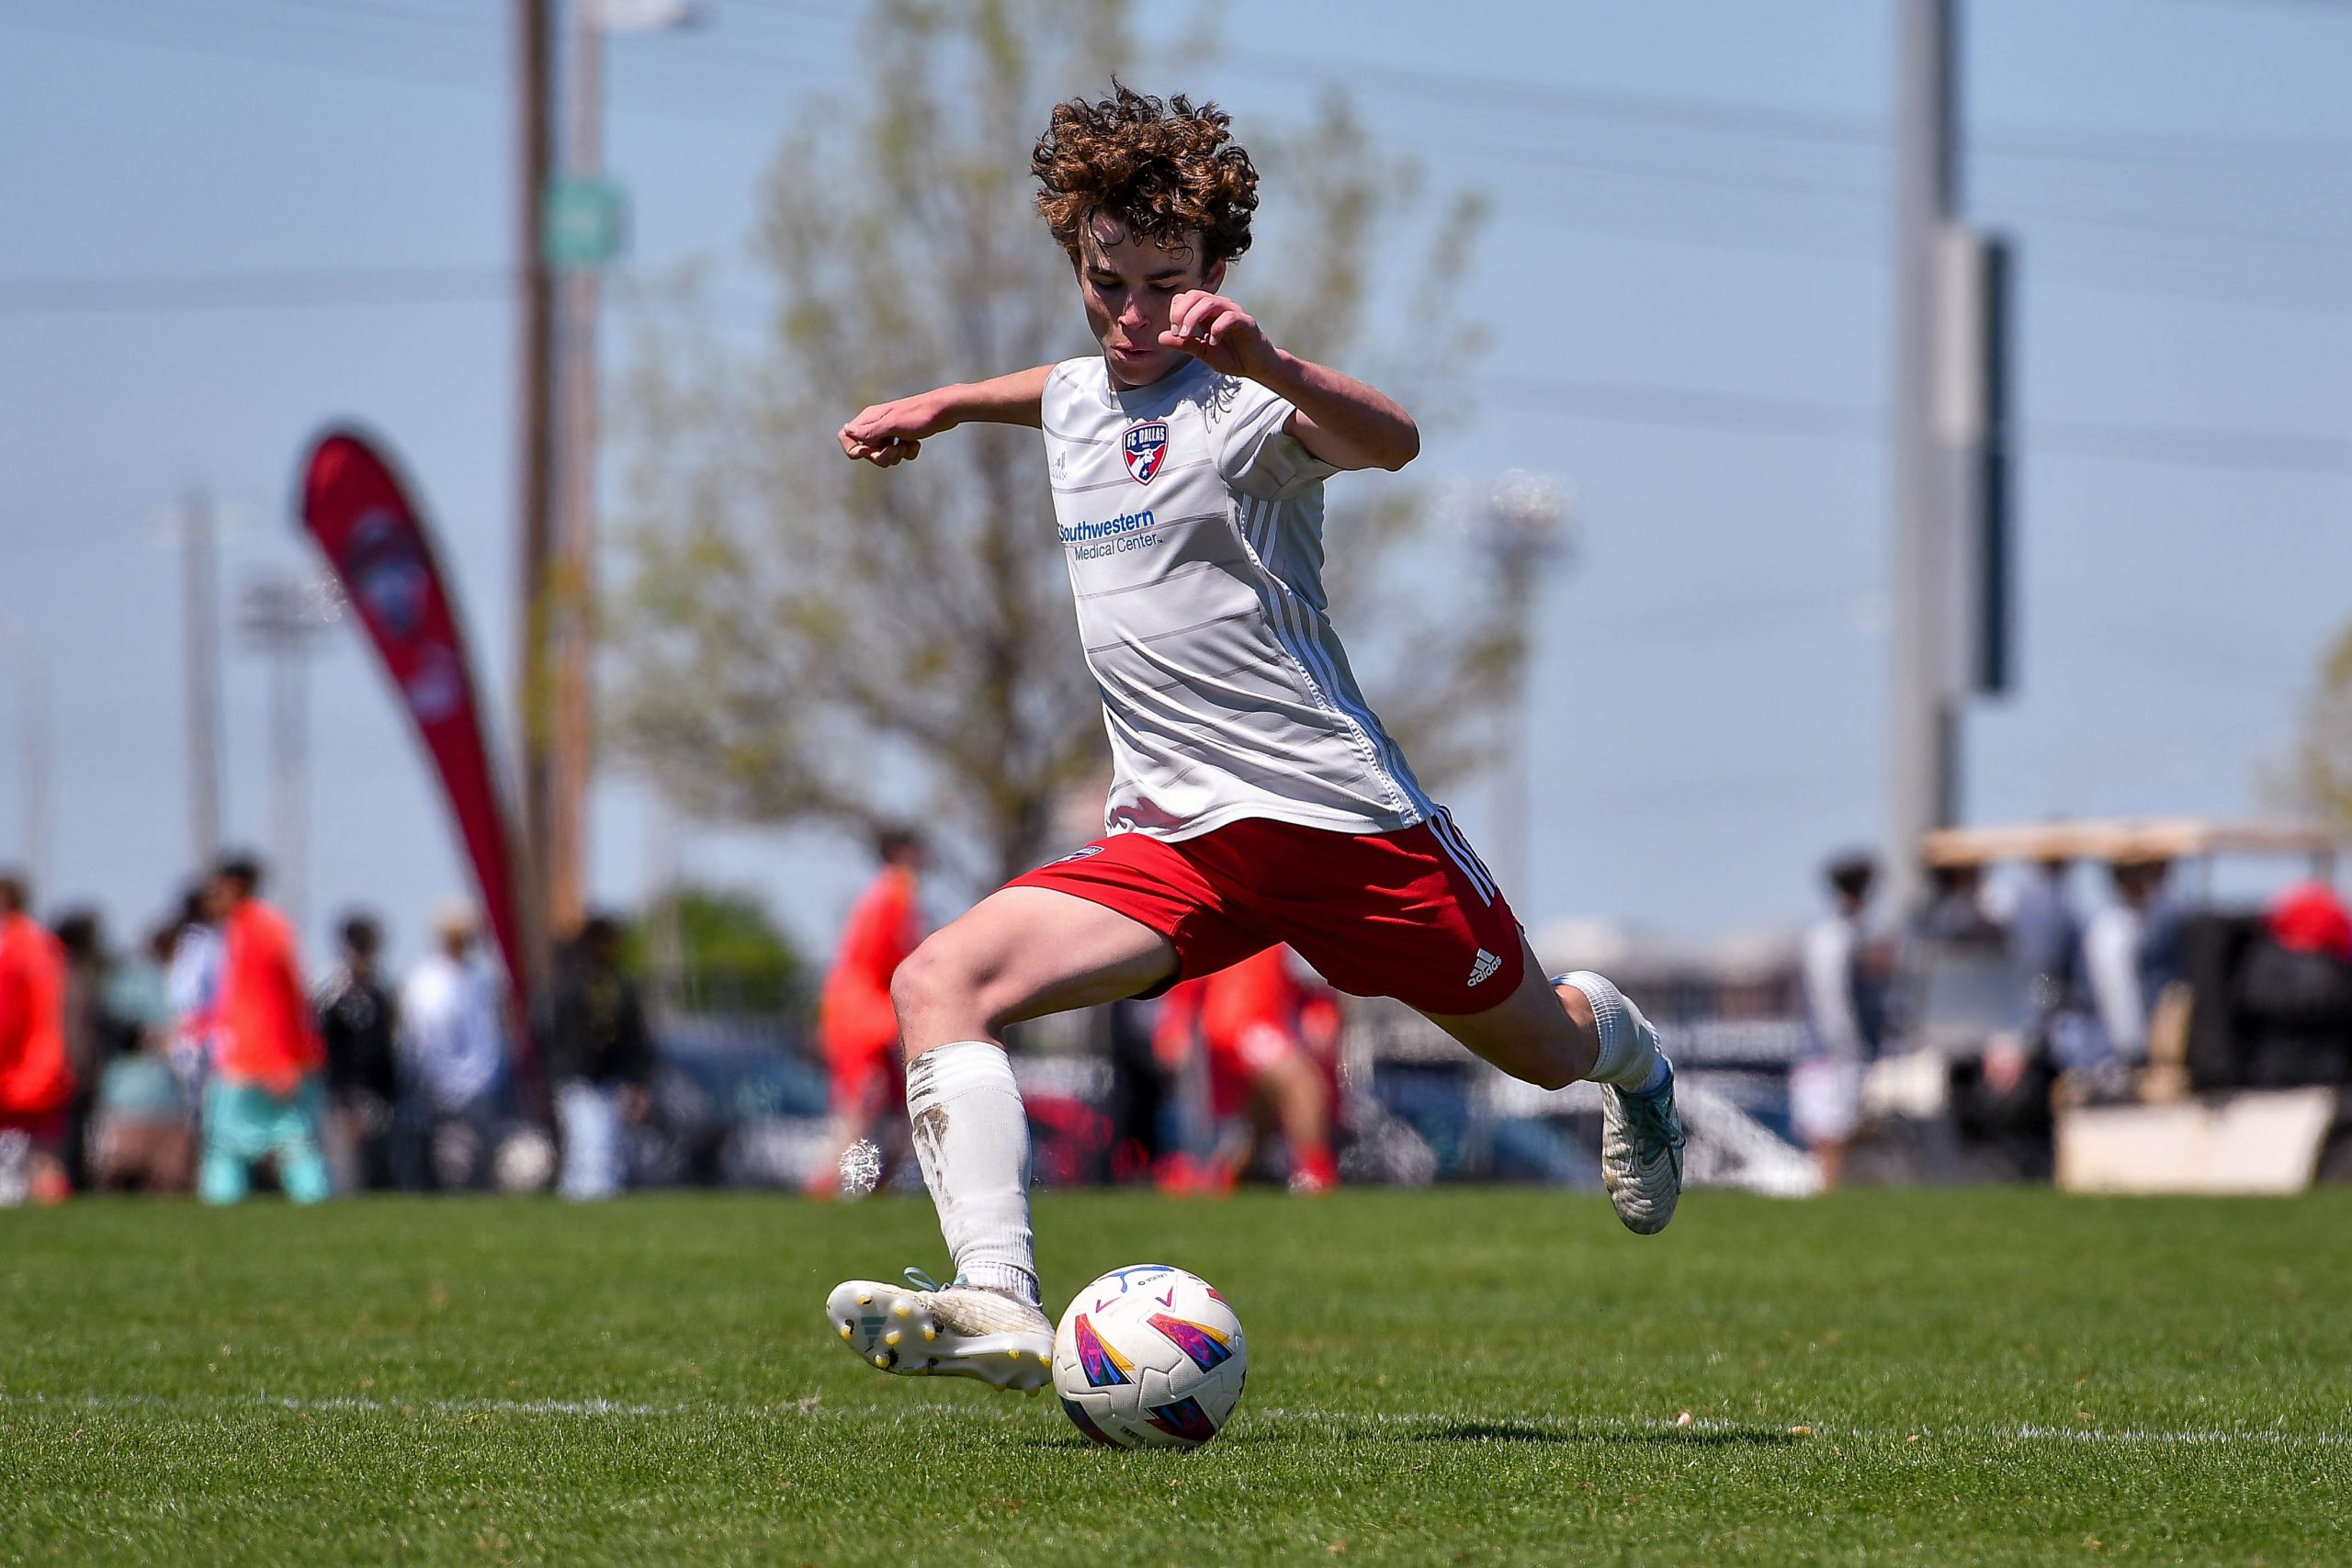 FC Dallas U17 ECNL White defender Jace Brewer sends a long ball down field  in the Dallas Cup match against Doral SC at Toyota Soccer Center on March 26, 2024. (Daniel McCullough, 3rd Degree)